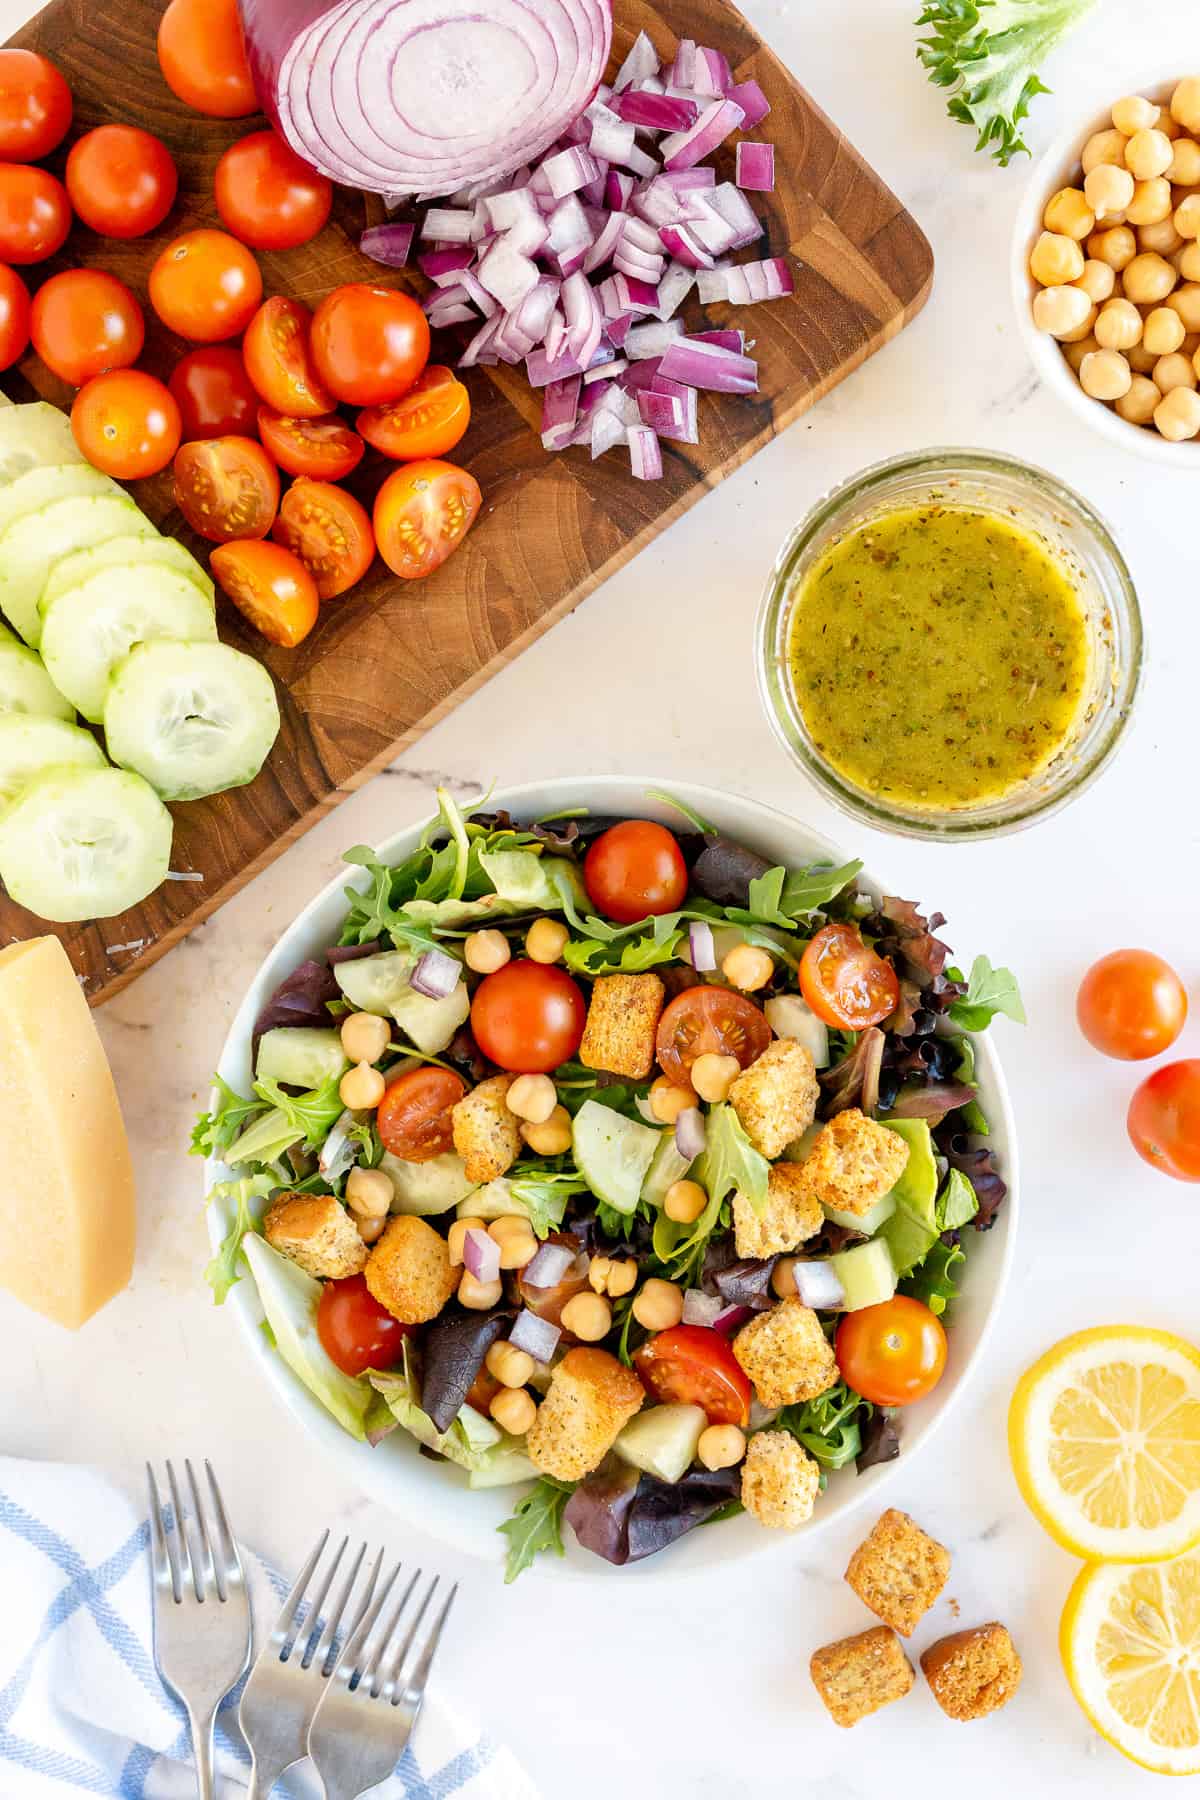 A big colorful salad surrounded by chopped vegetables and Italian salad dressing.